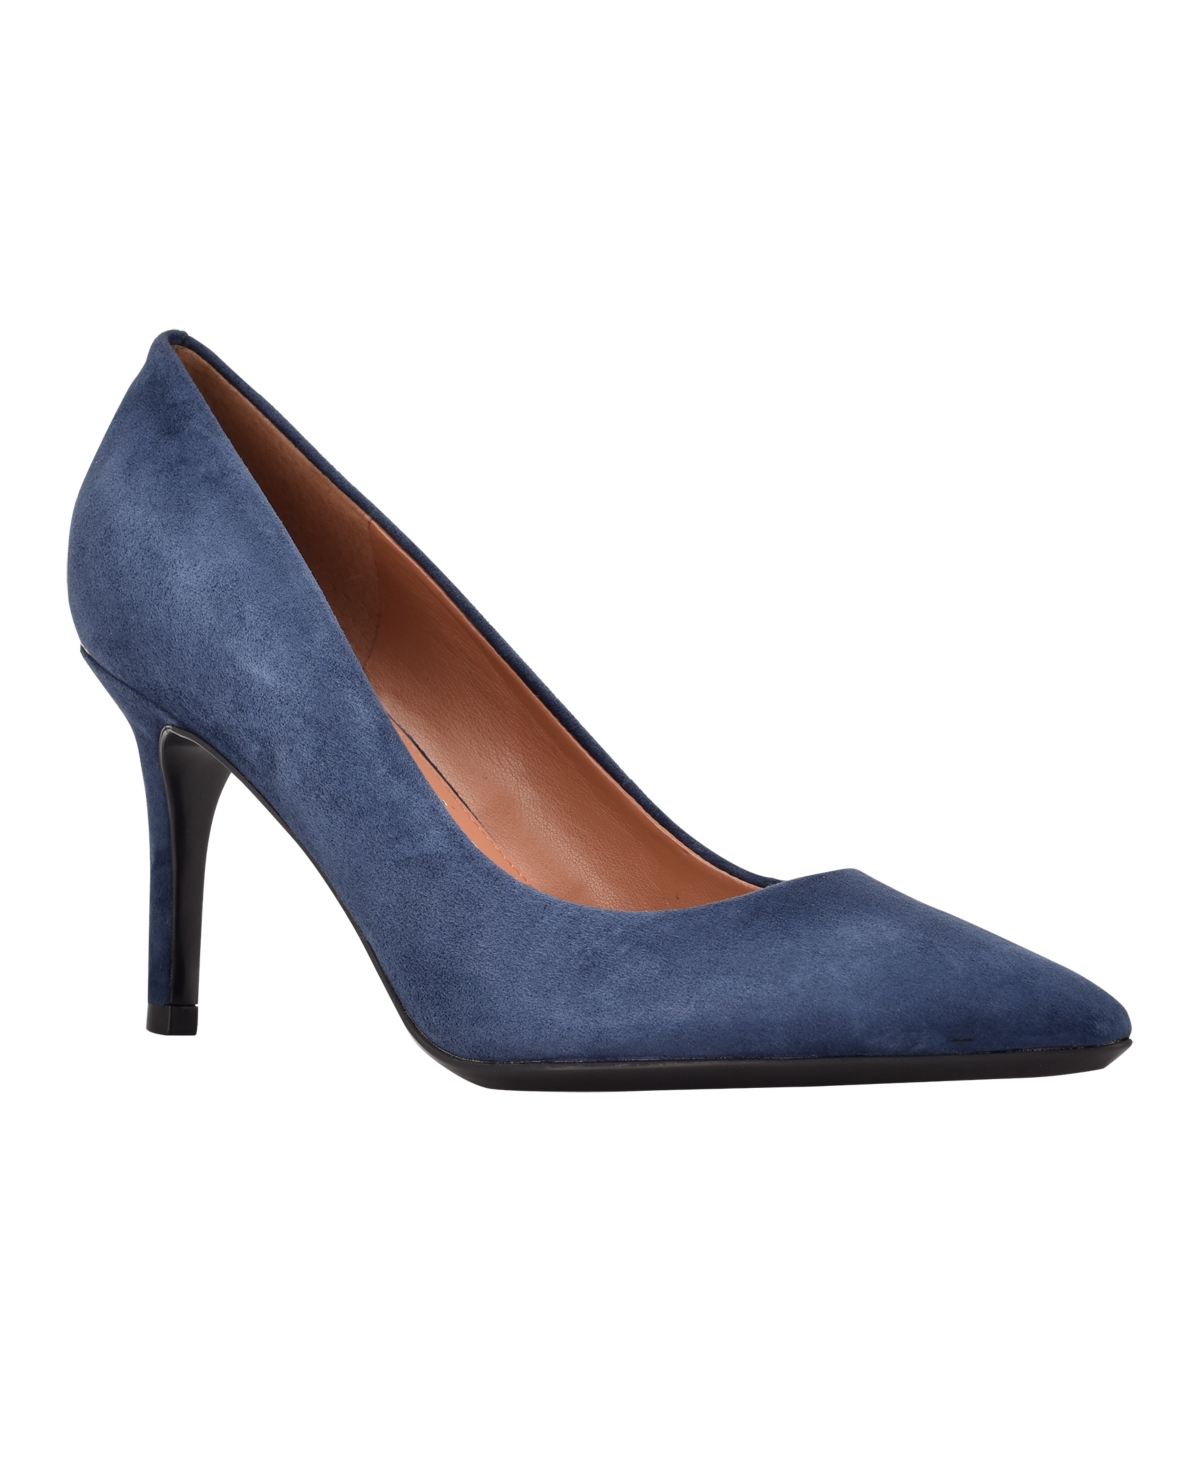 UPC 195972492837 product image for Calvin Klein Women's Gayle Pointy Toe Pumps Women's Shoes | upcitemdb.com